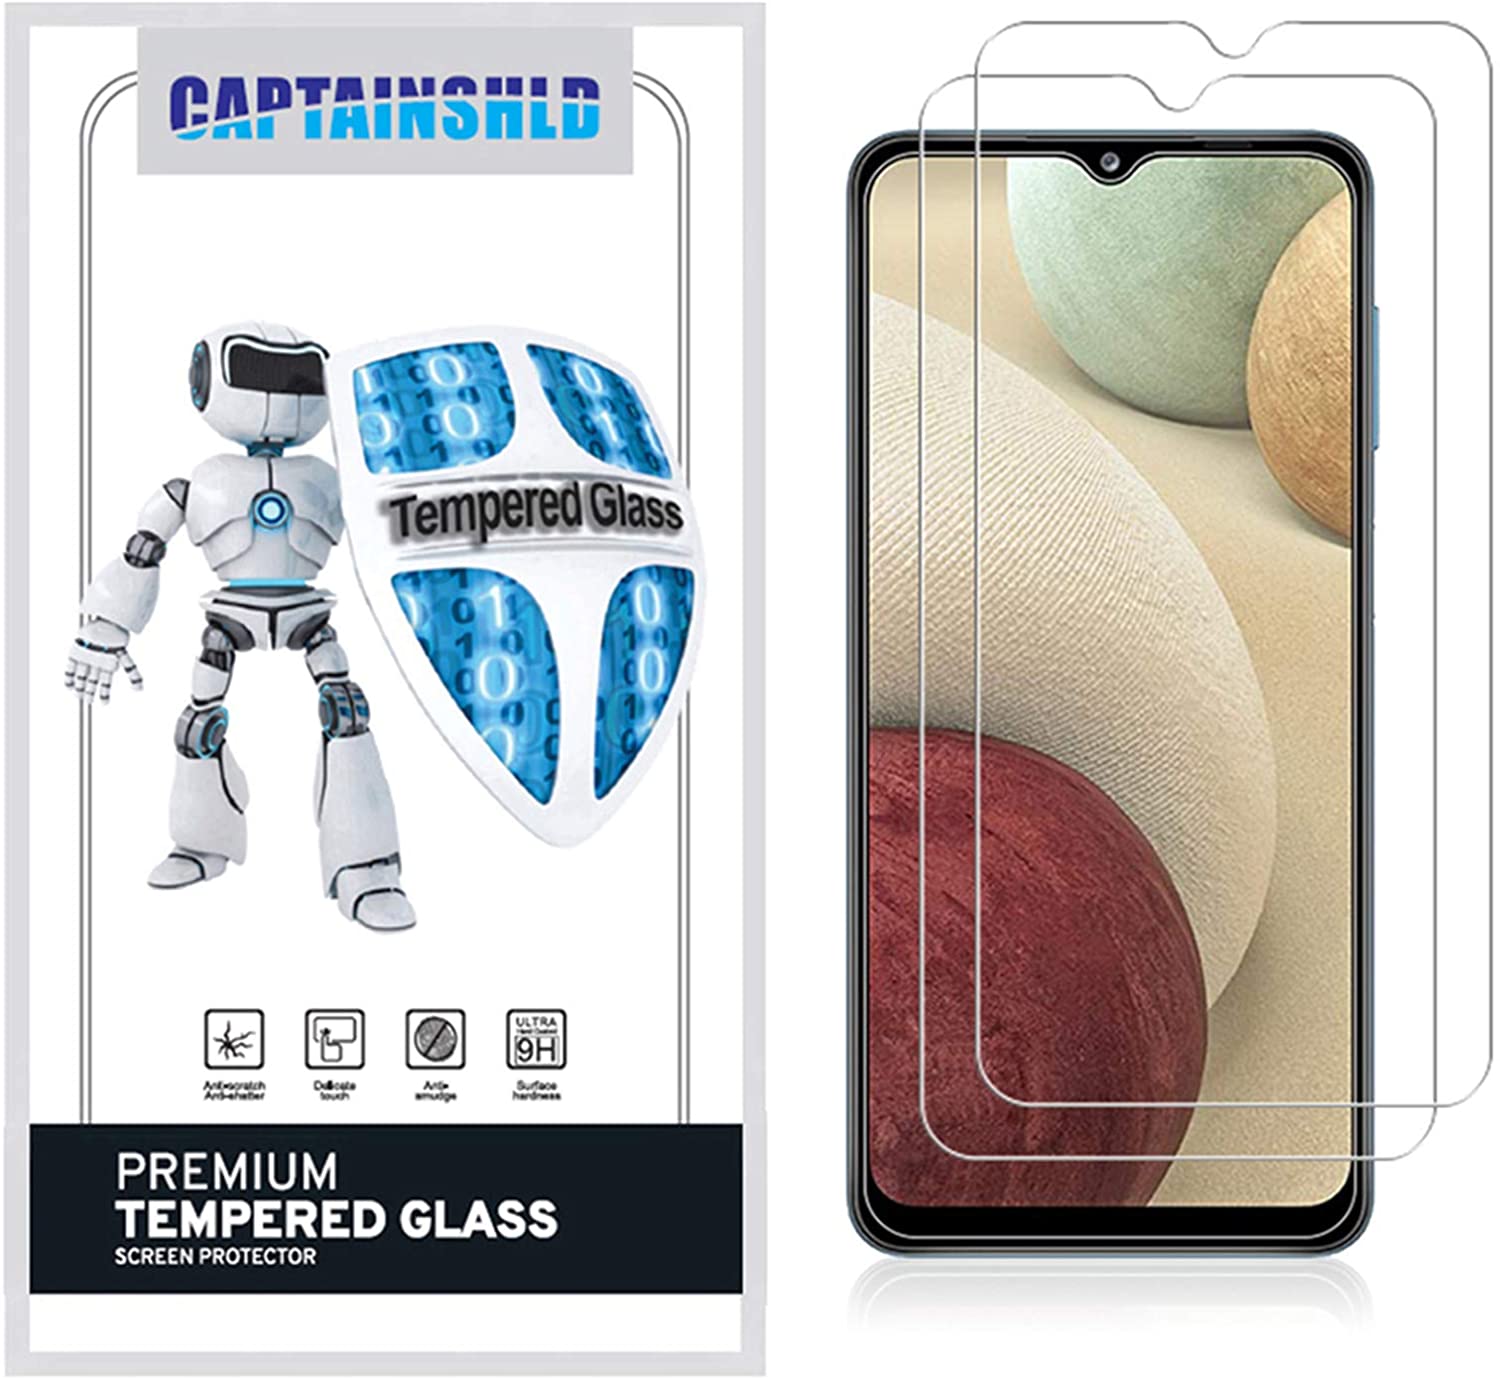 Captainshld Tempered Glass Galaxy A32 5g